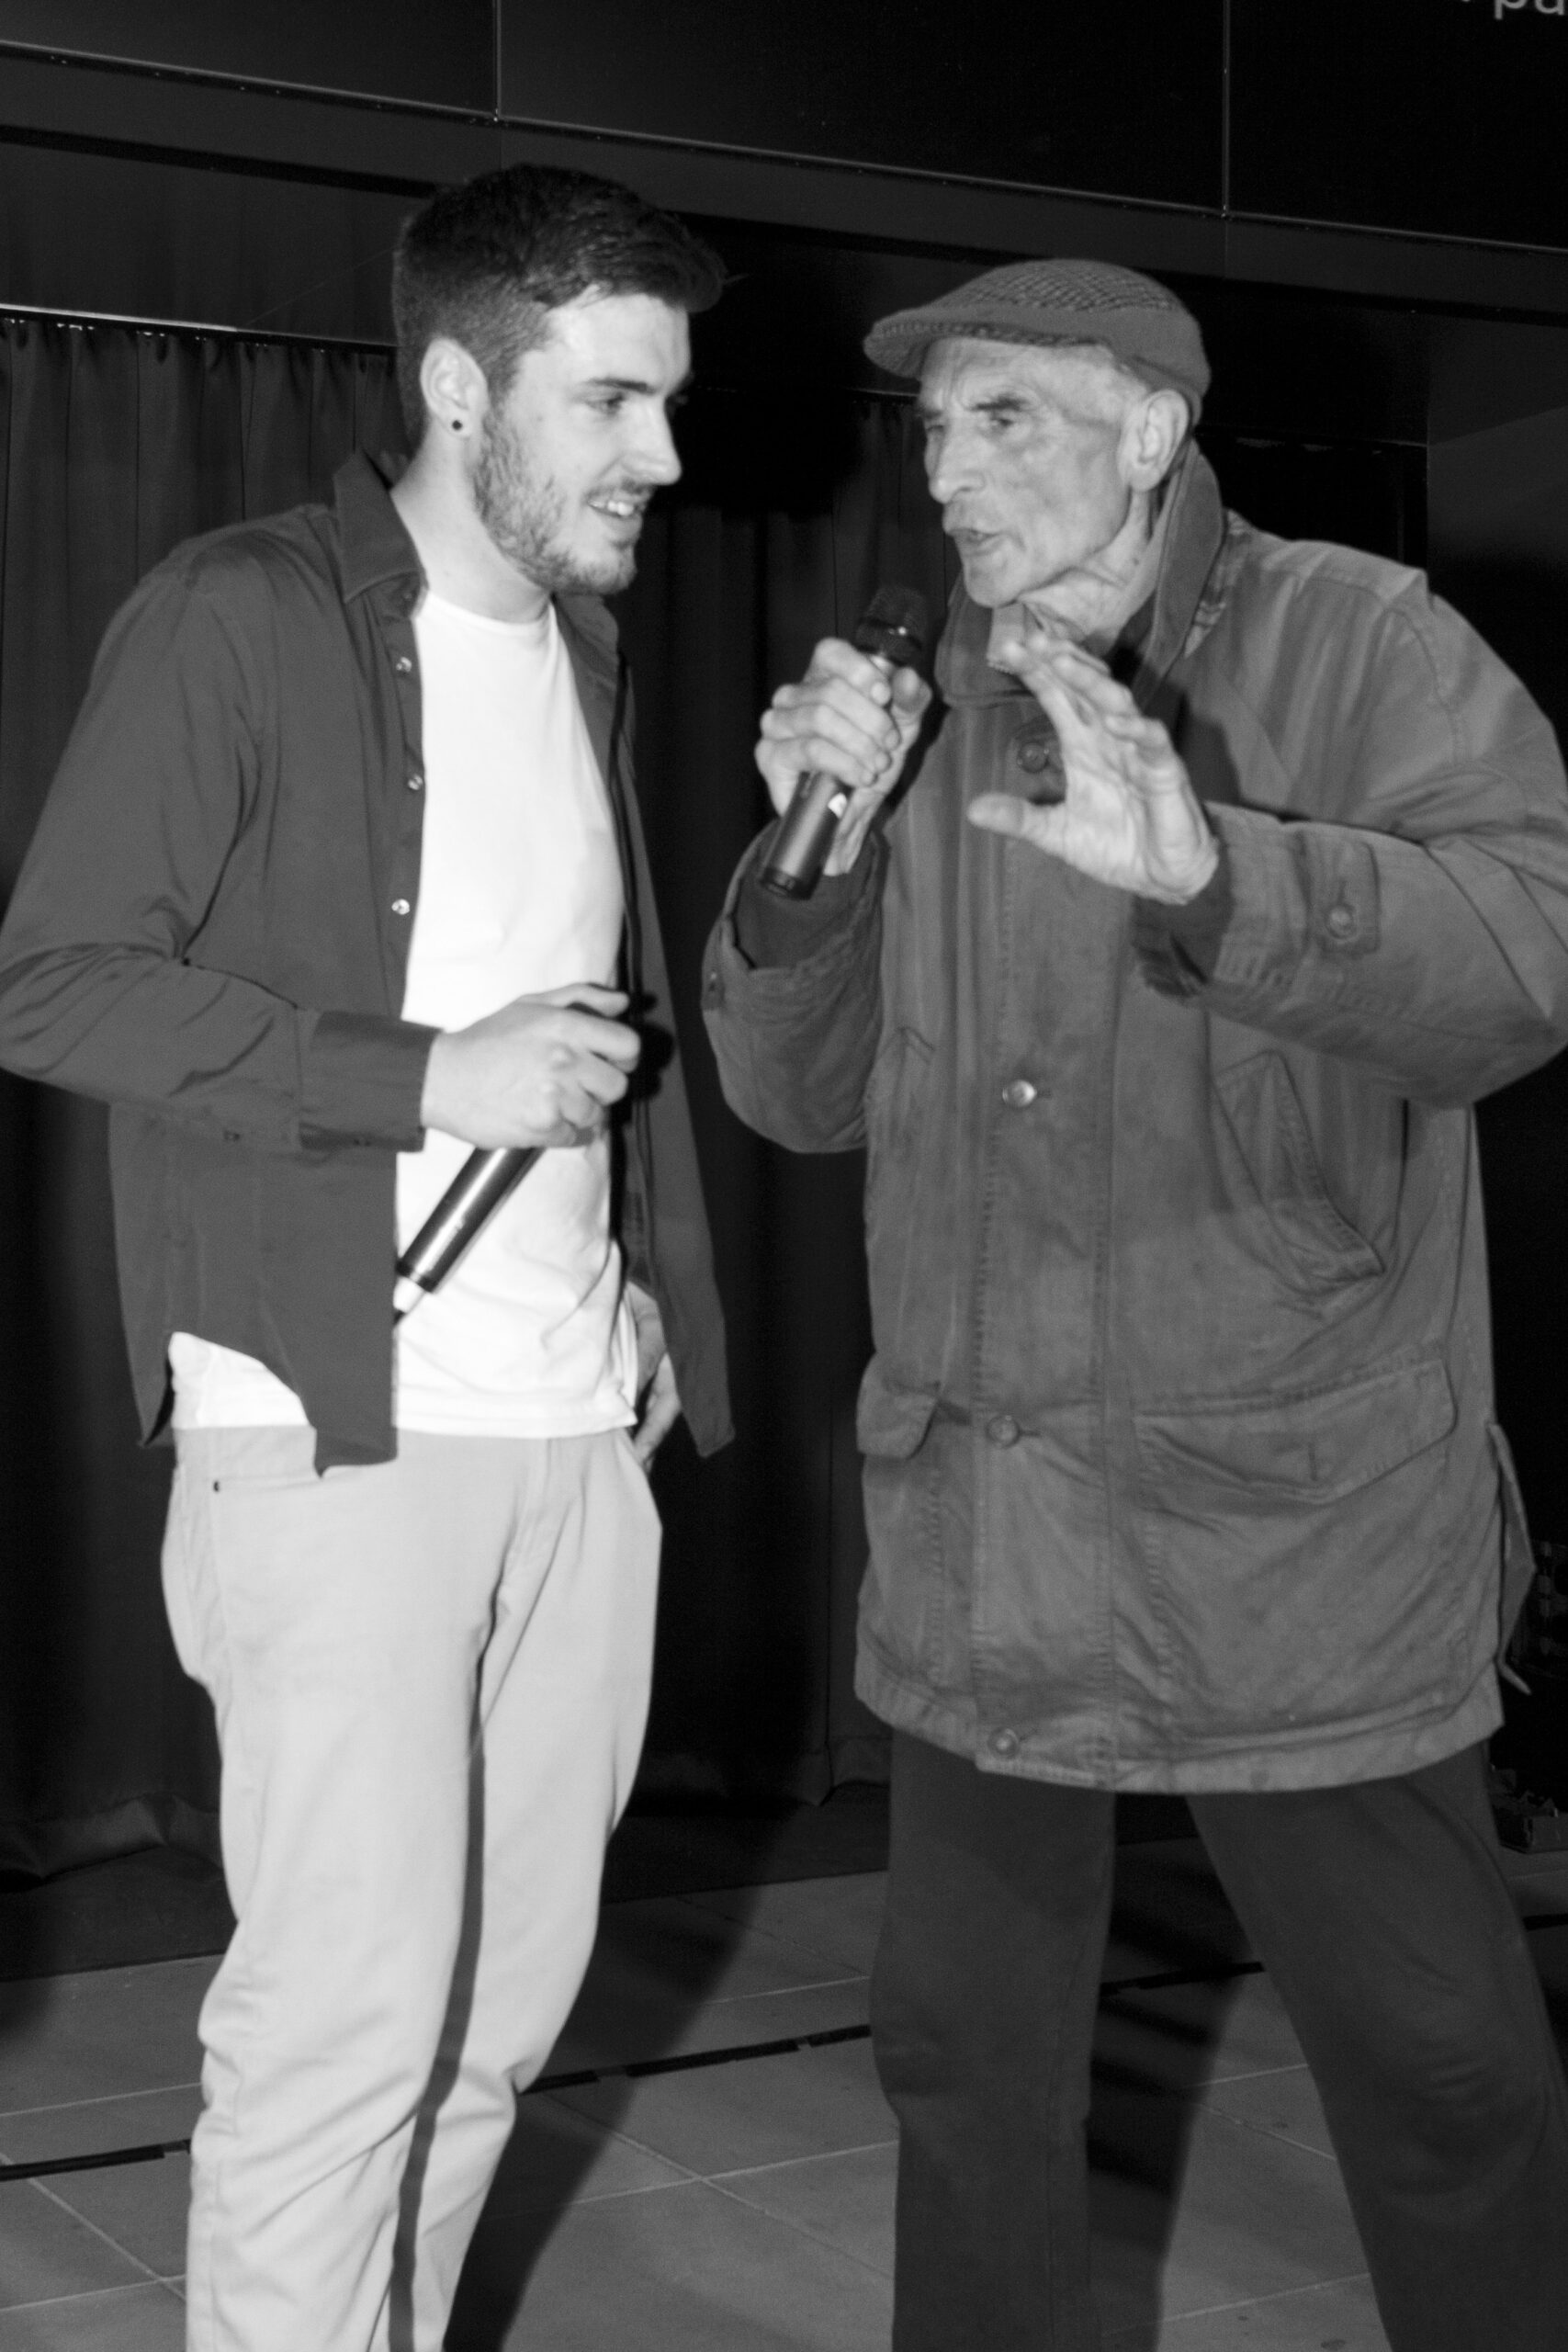 Joe and older man in black and white holding microphones chatting 